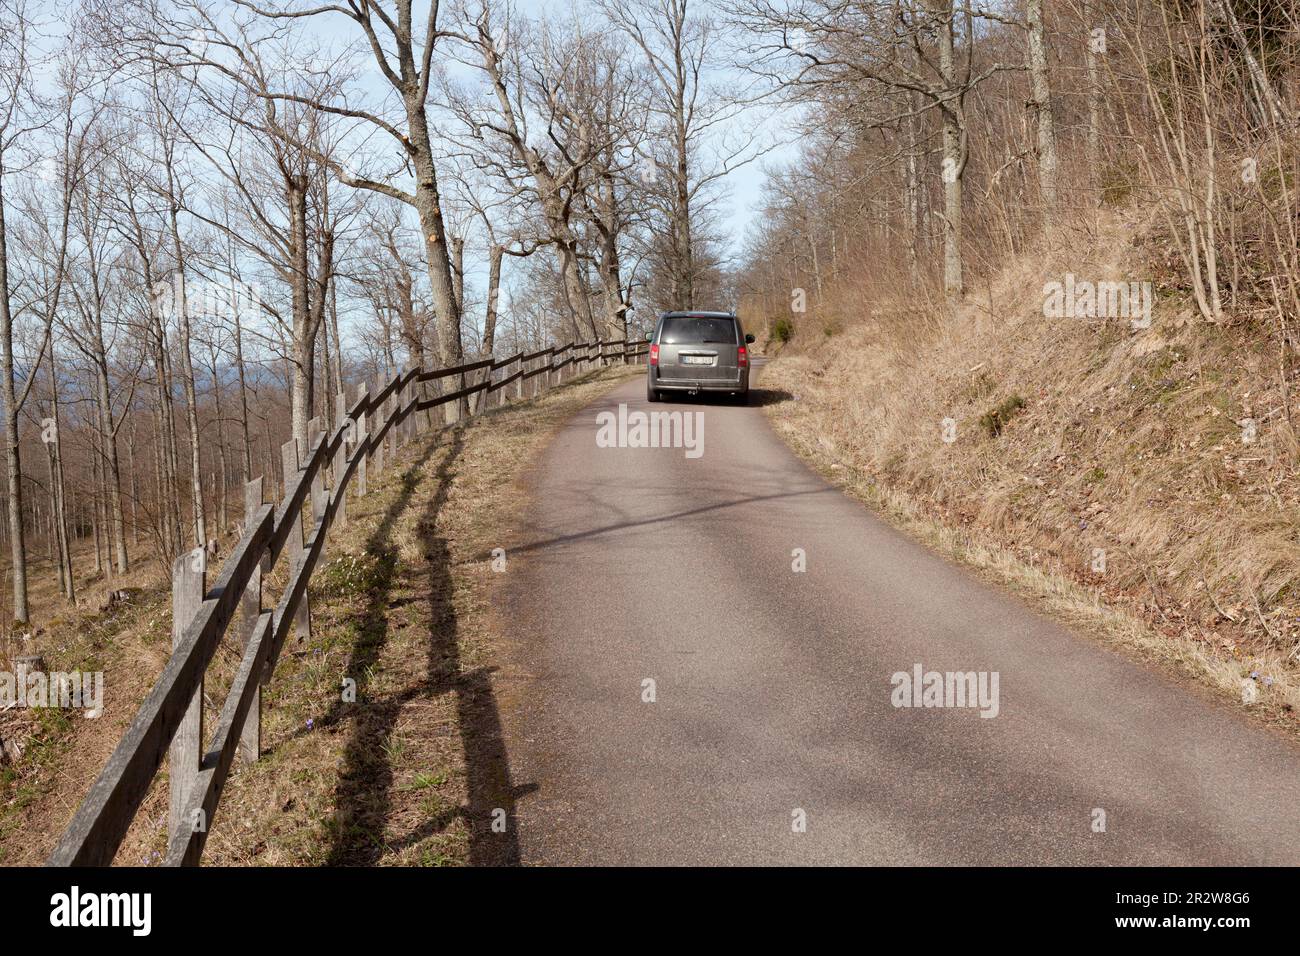 OMBERG, SWEDEN ON APRIL 09, 2015. View of a winding and narrow road. A car moves uphill. Trees, fences by the road. Editorial us Stock Photo